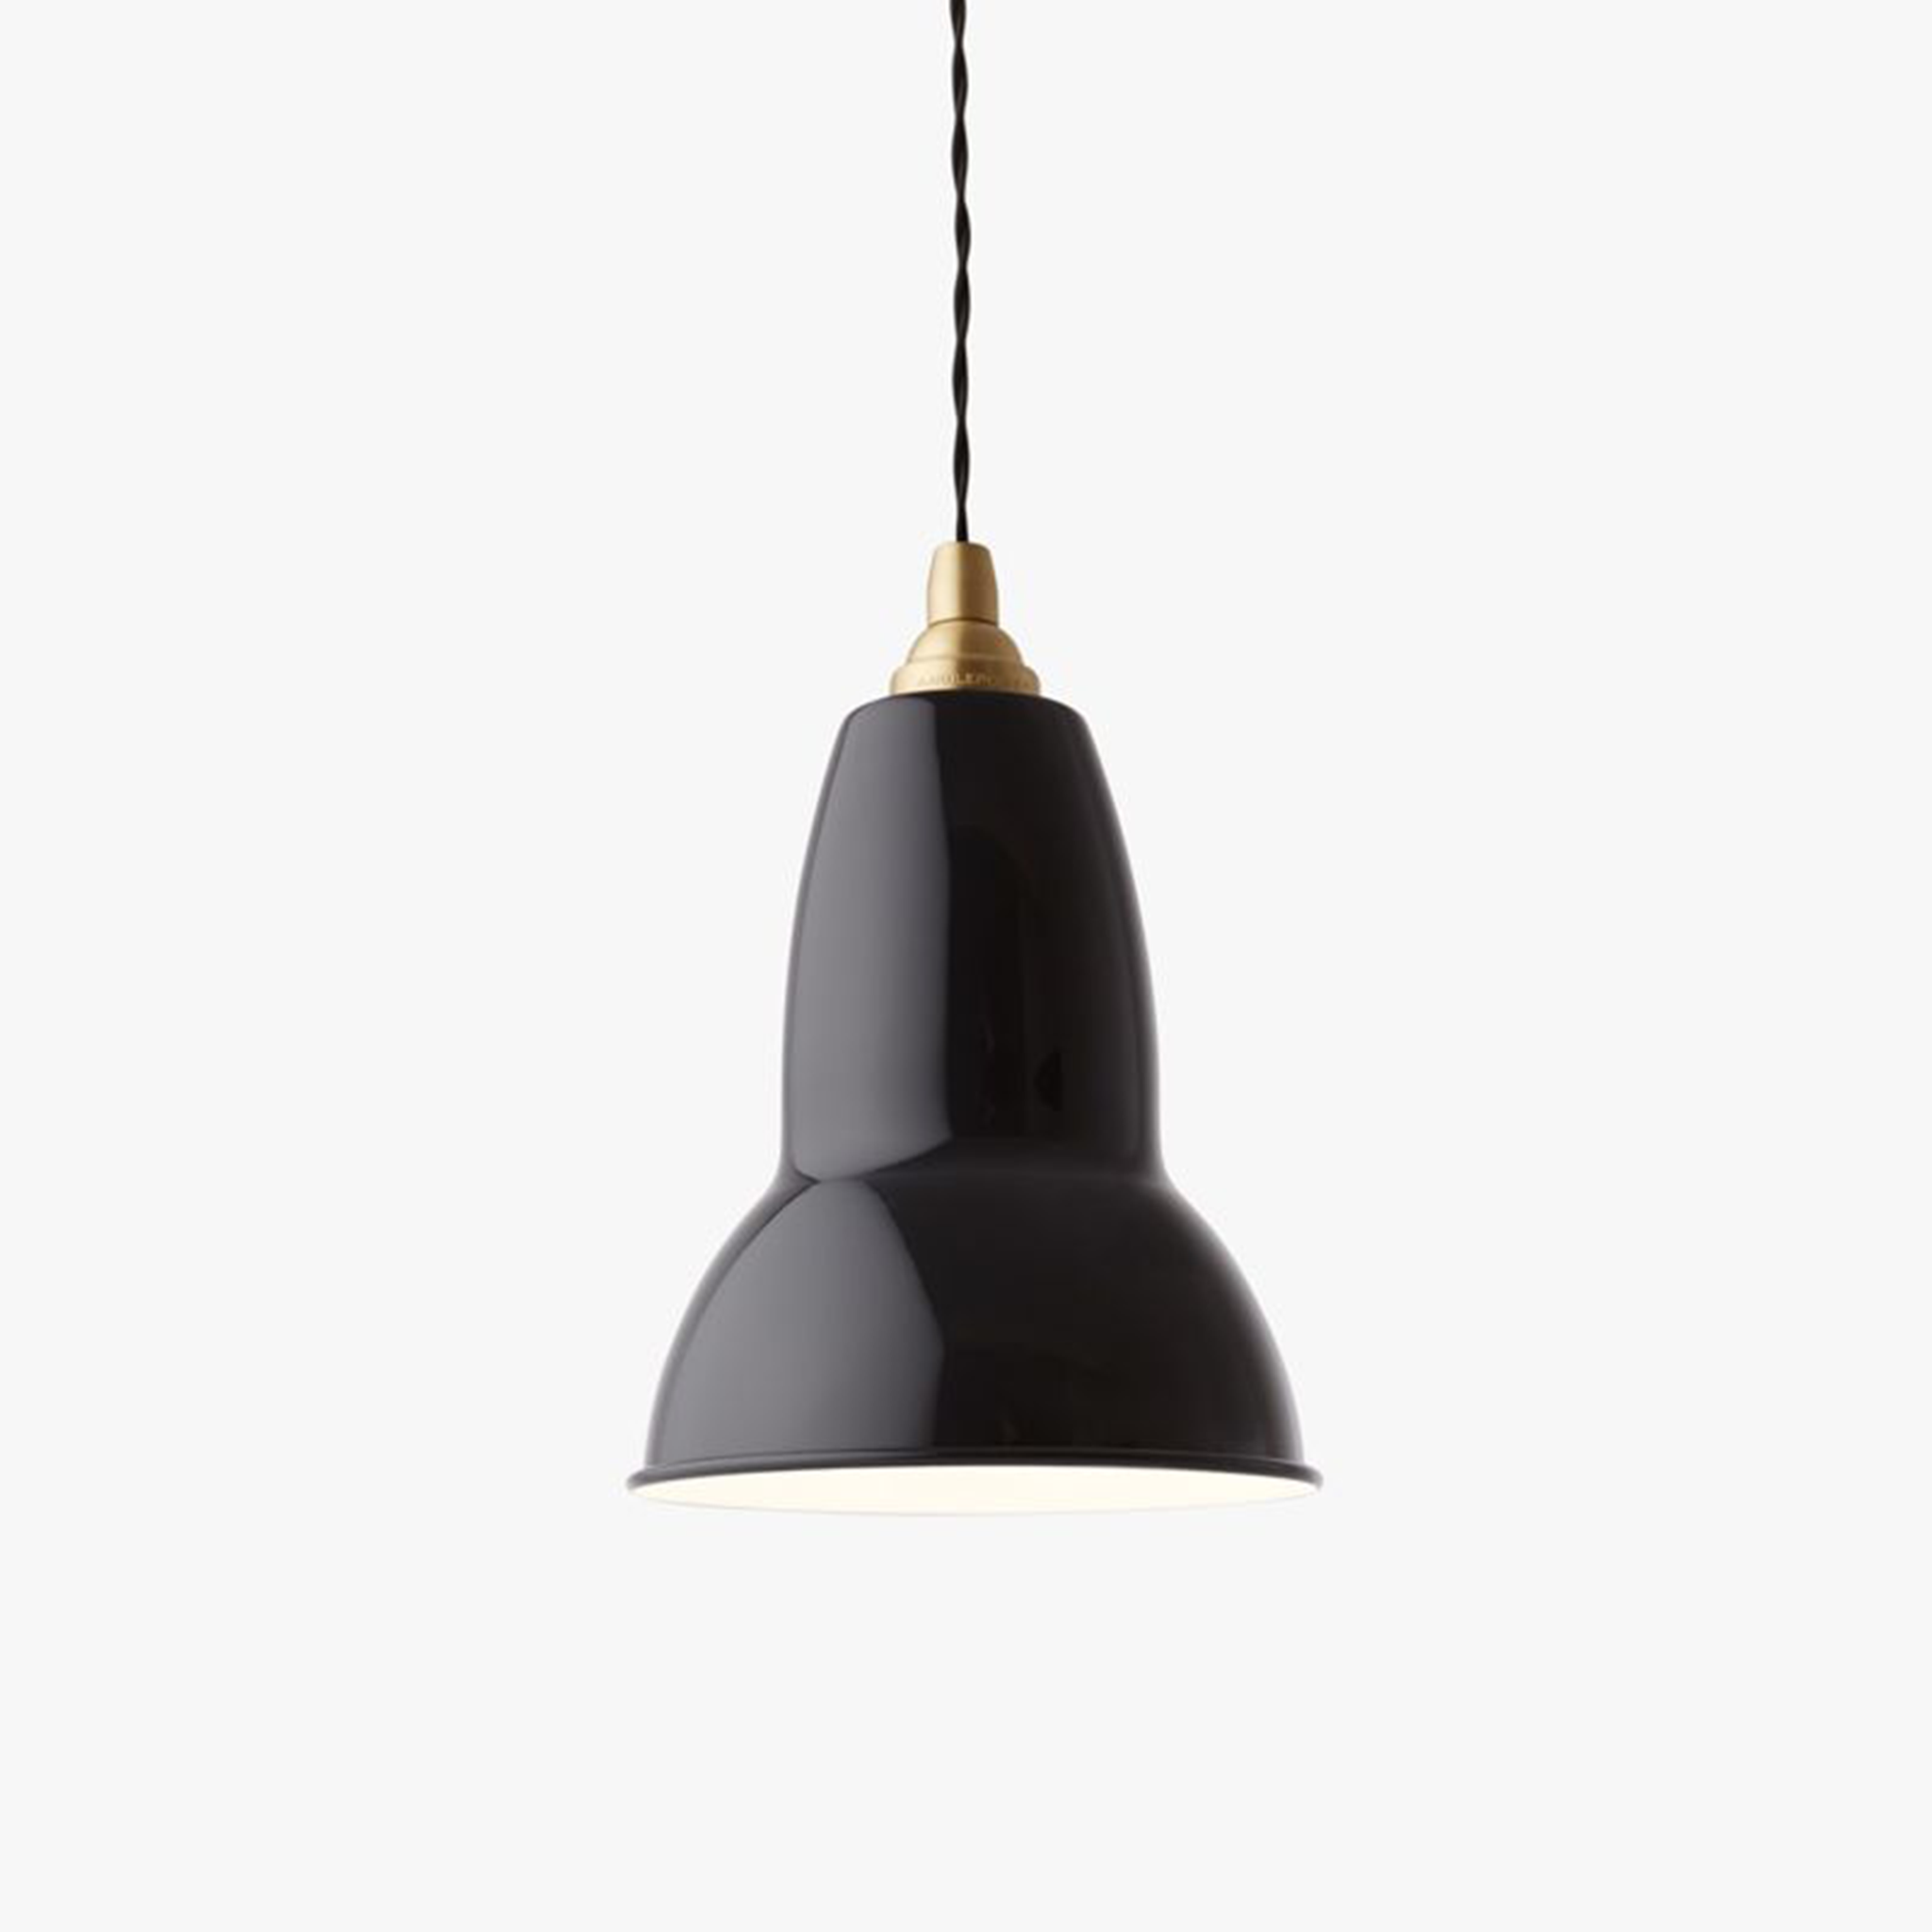 Original 1227 Brass Pendant by Anglepoise